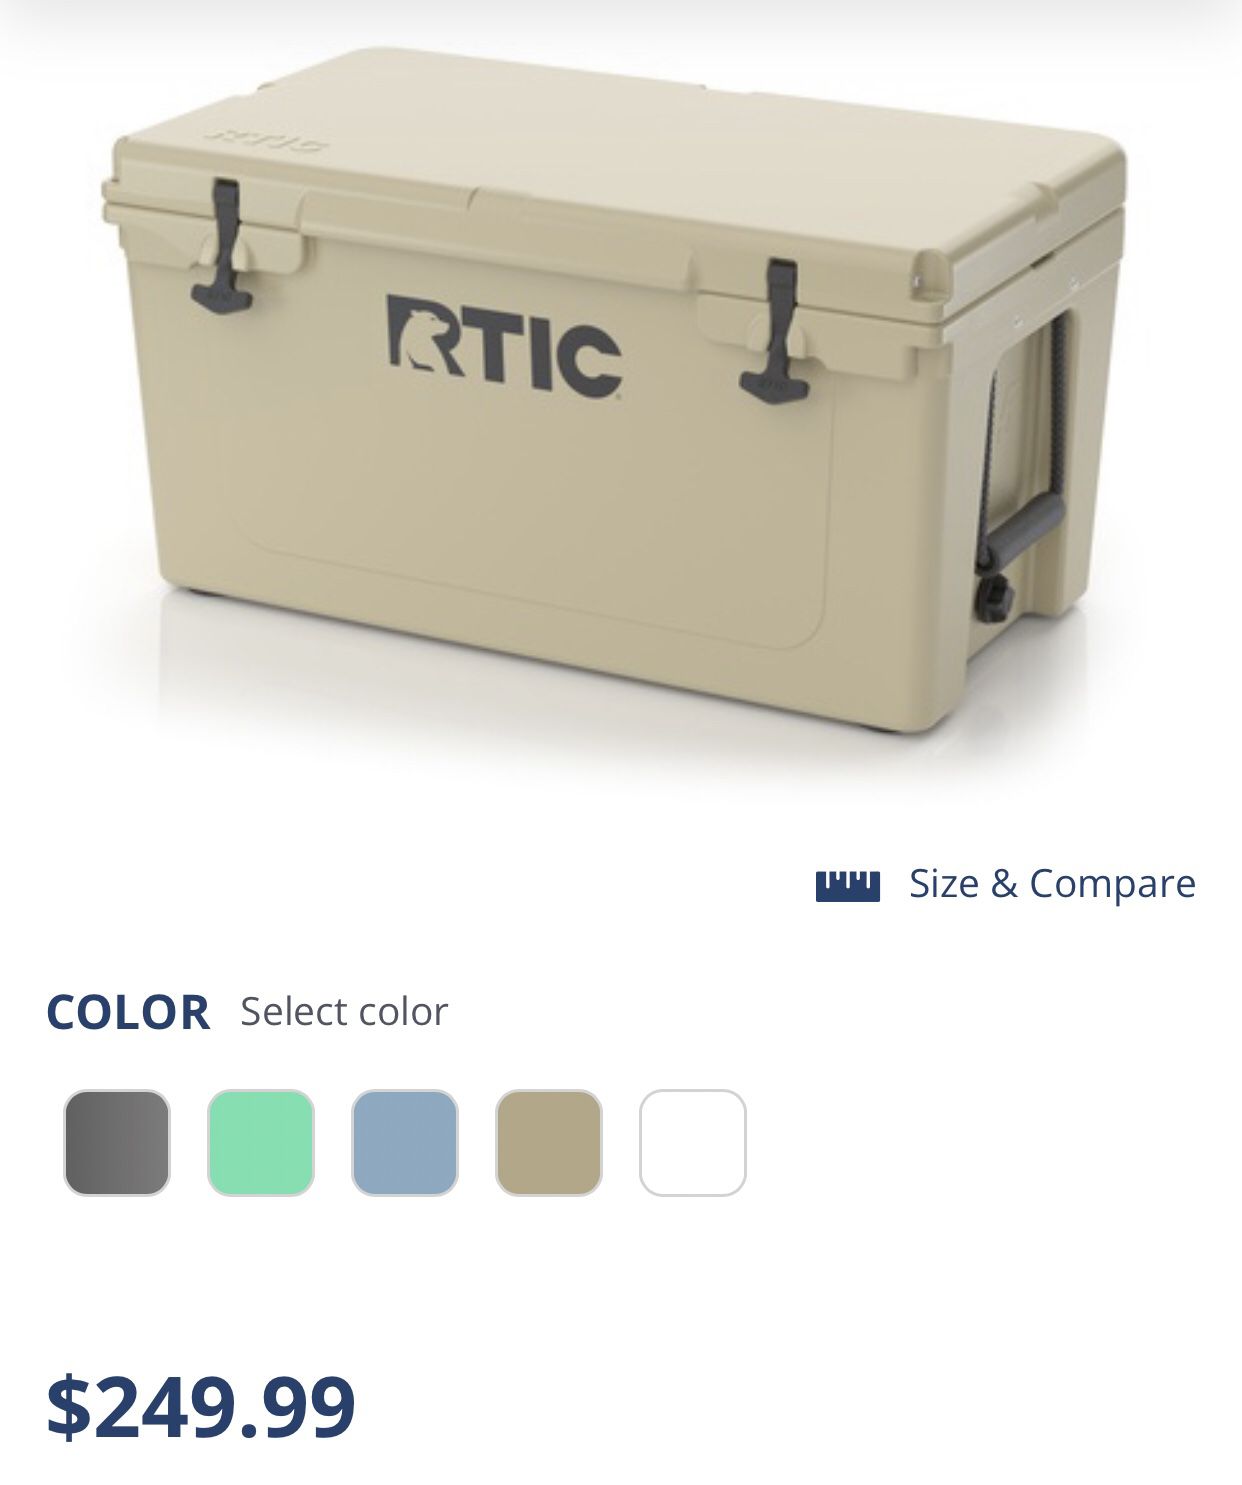 RTIC 65 COOLER